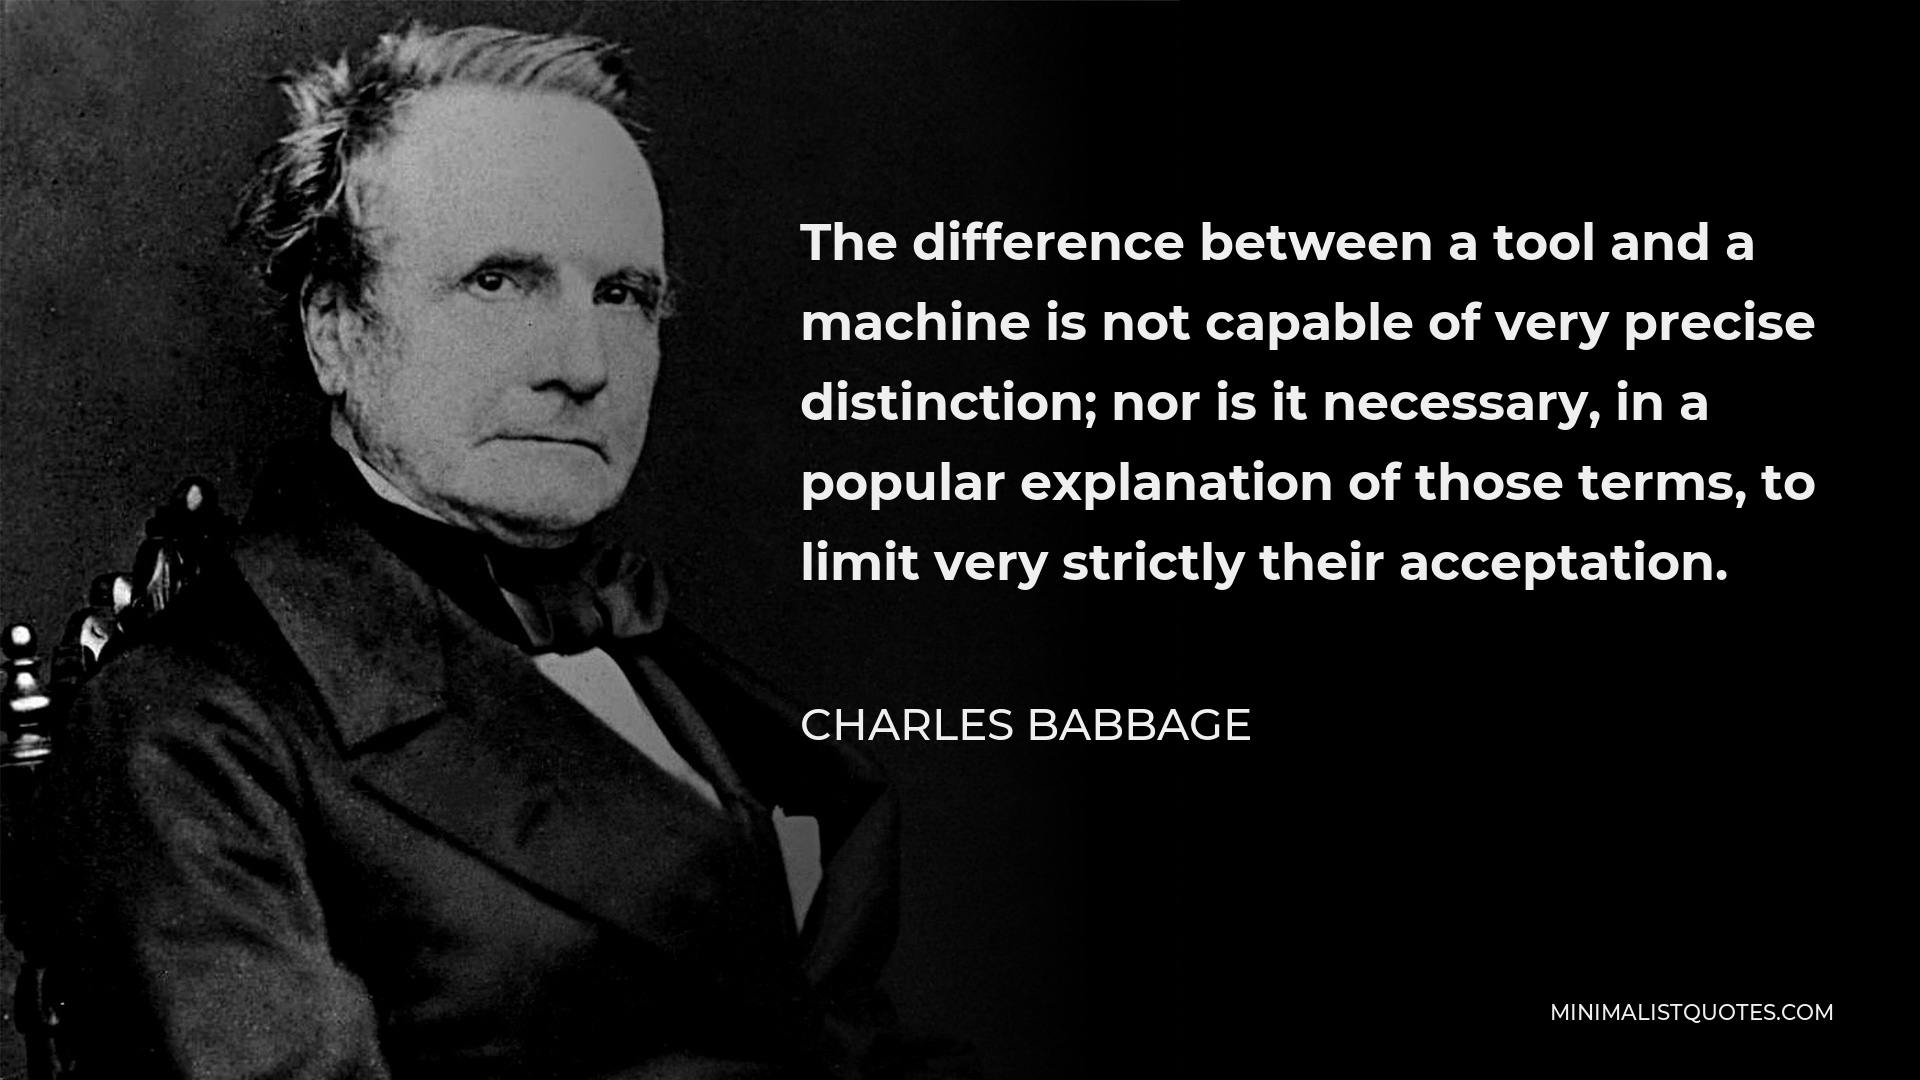 Charles Babbage Quote - The difference between a tool and a machine is not capable of very precise distinction; nor is it necessary, in a popular explanation of those terms, to limit very strictly their acceptation.